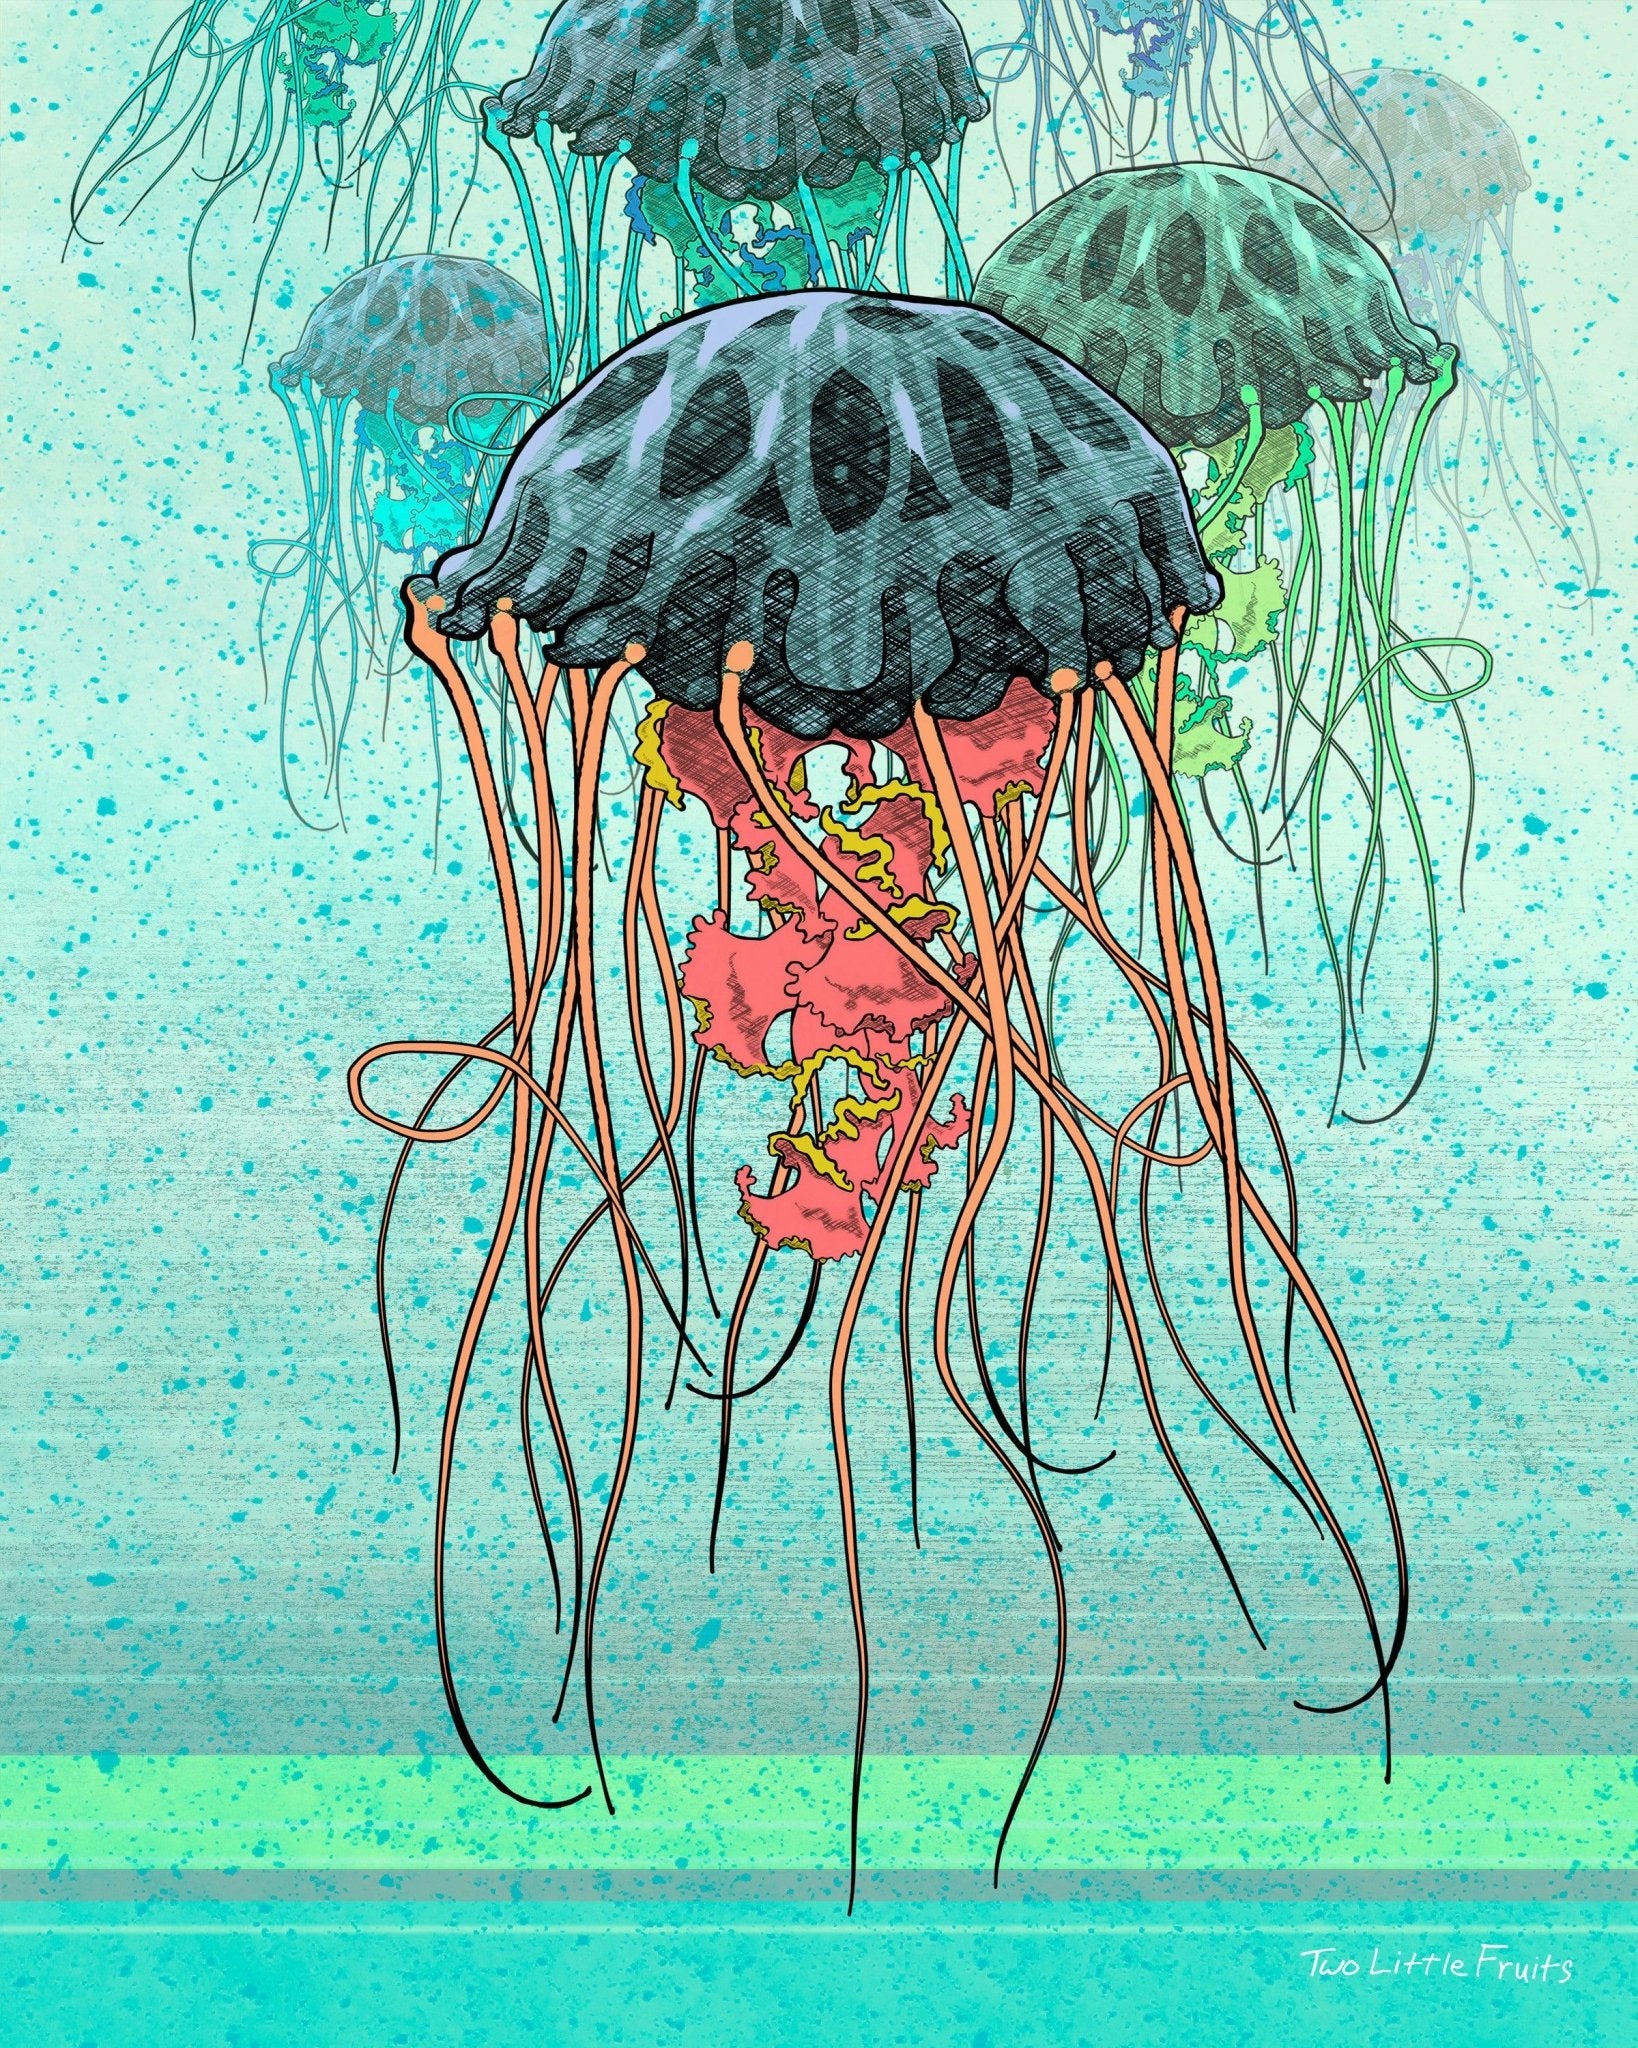 Jellyfish Art Print - Paper Prints - Two Little Fruits - Two Little Fruits